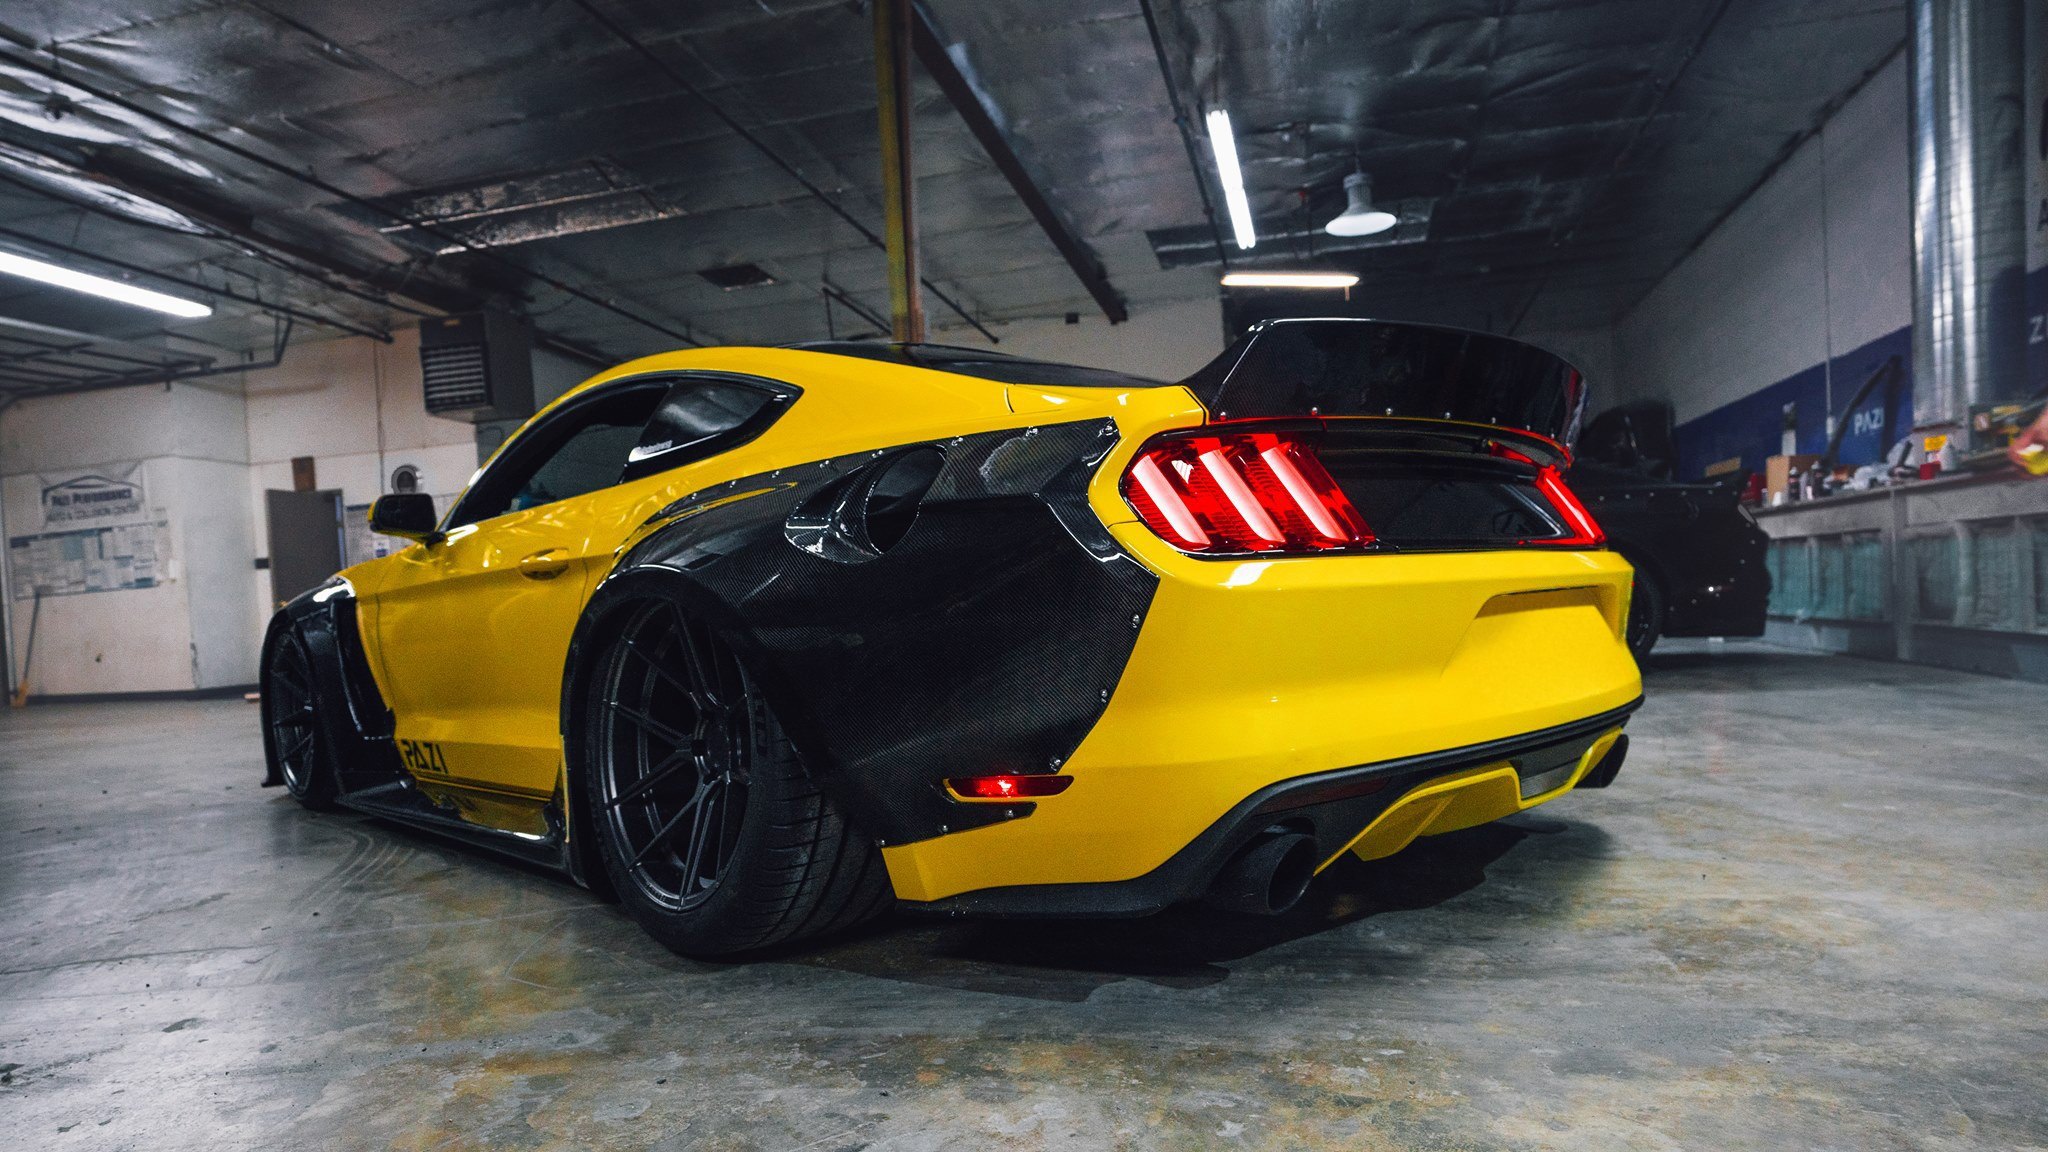 Carbon Fiber Fender Flares on Yellow Ford Mustang - Photo by Clinched